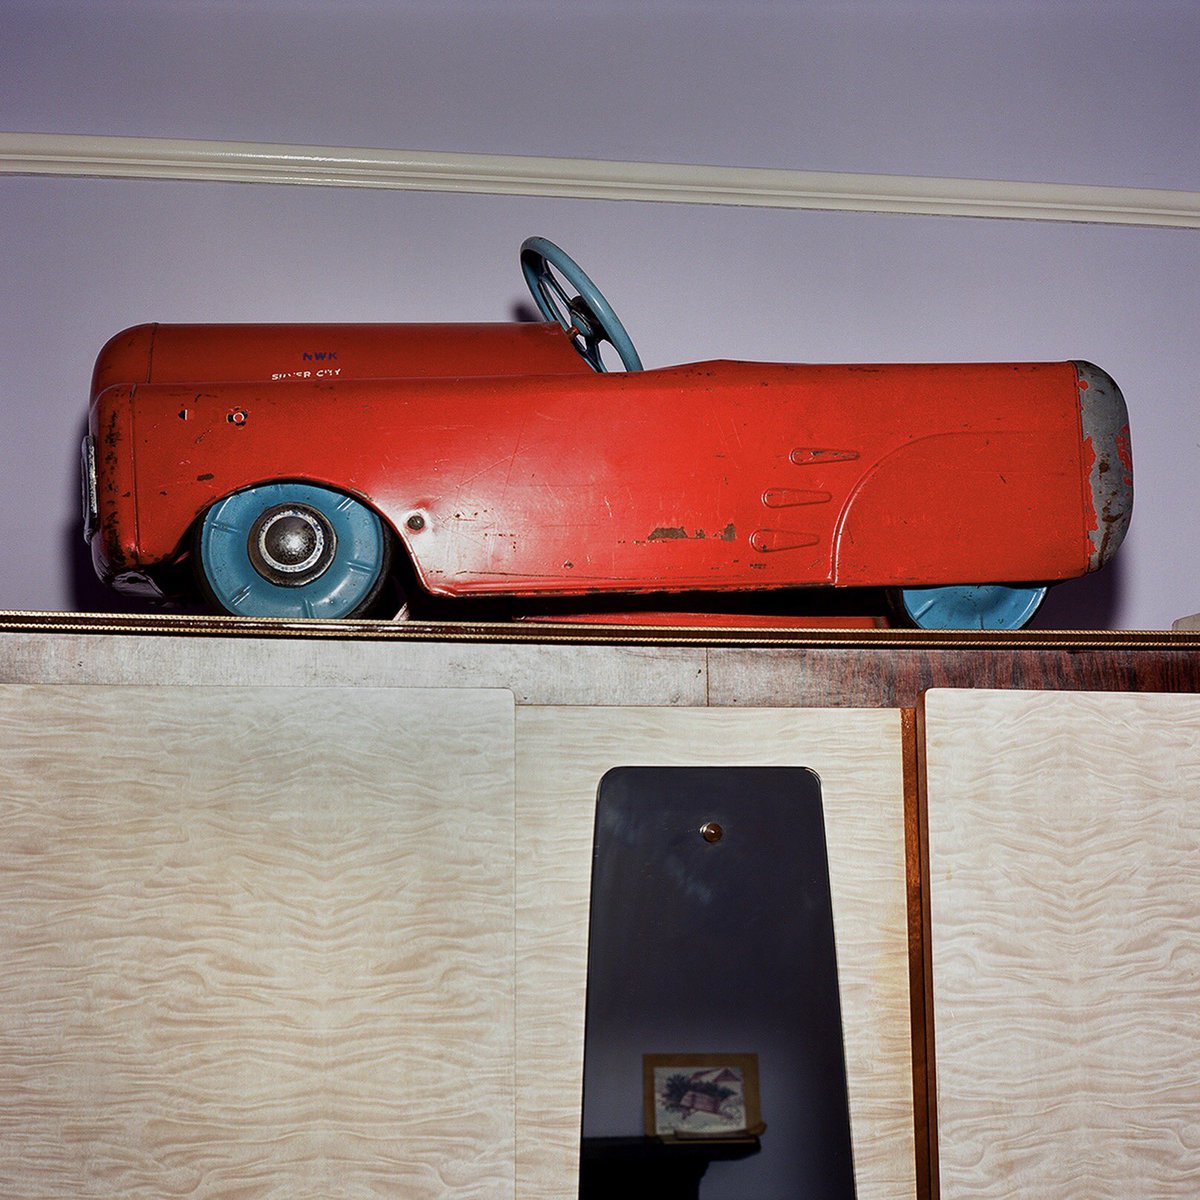 Barbara’s House. 

The scanning and editing is finished now. 

Thank you for your comments, ideas and support with this project. 

One last image, for now, of the red tin car her children rode around the garden. 

#WindrushGeneration 

Photo: Paul Halliday